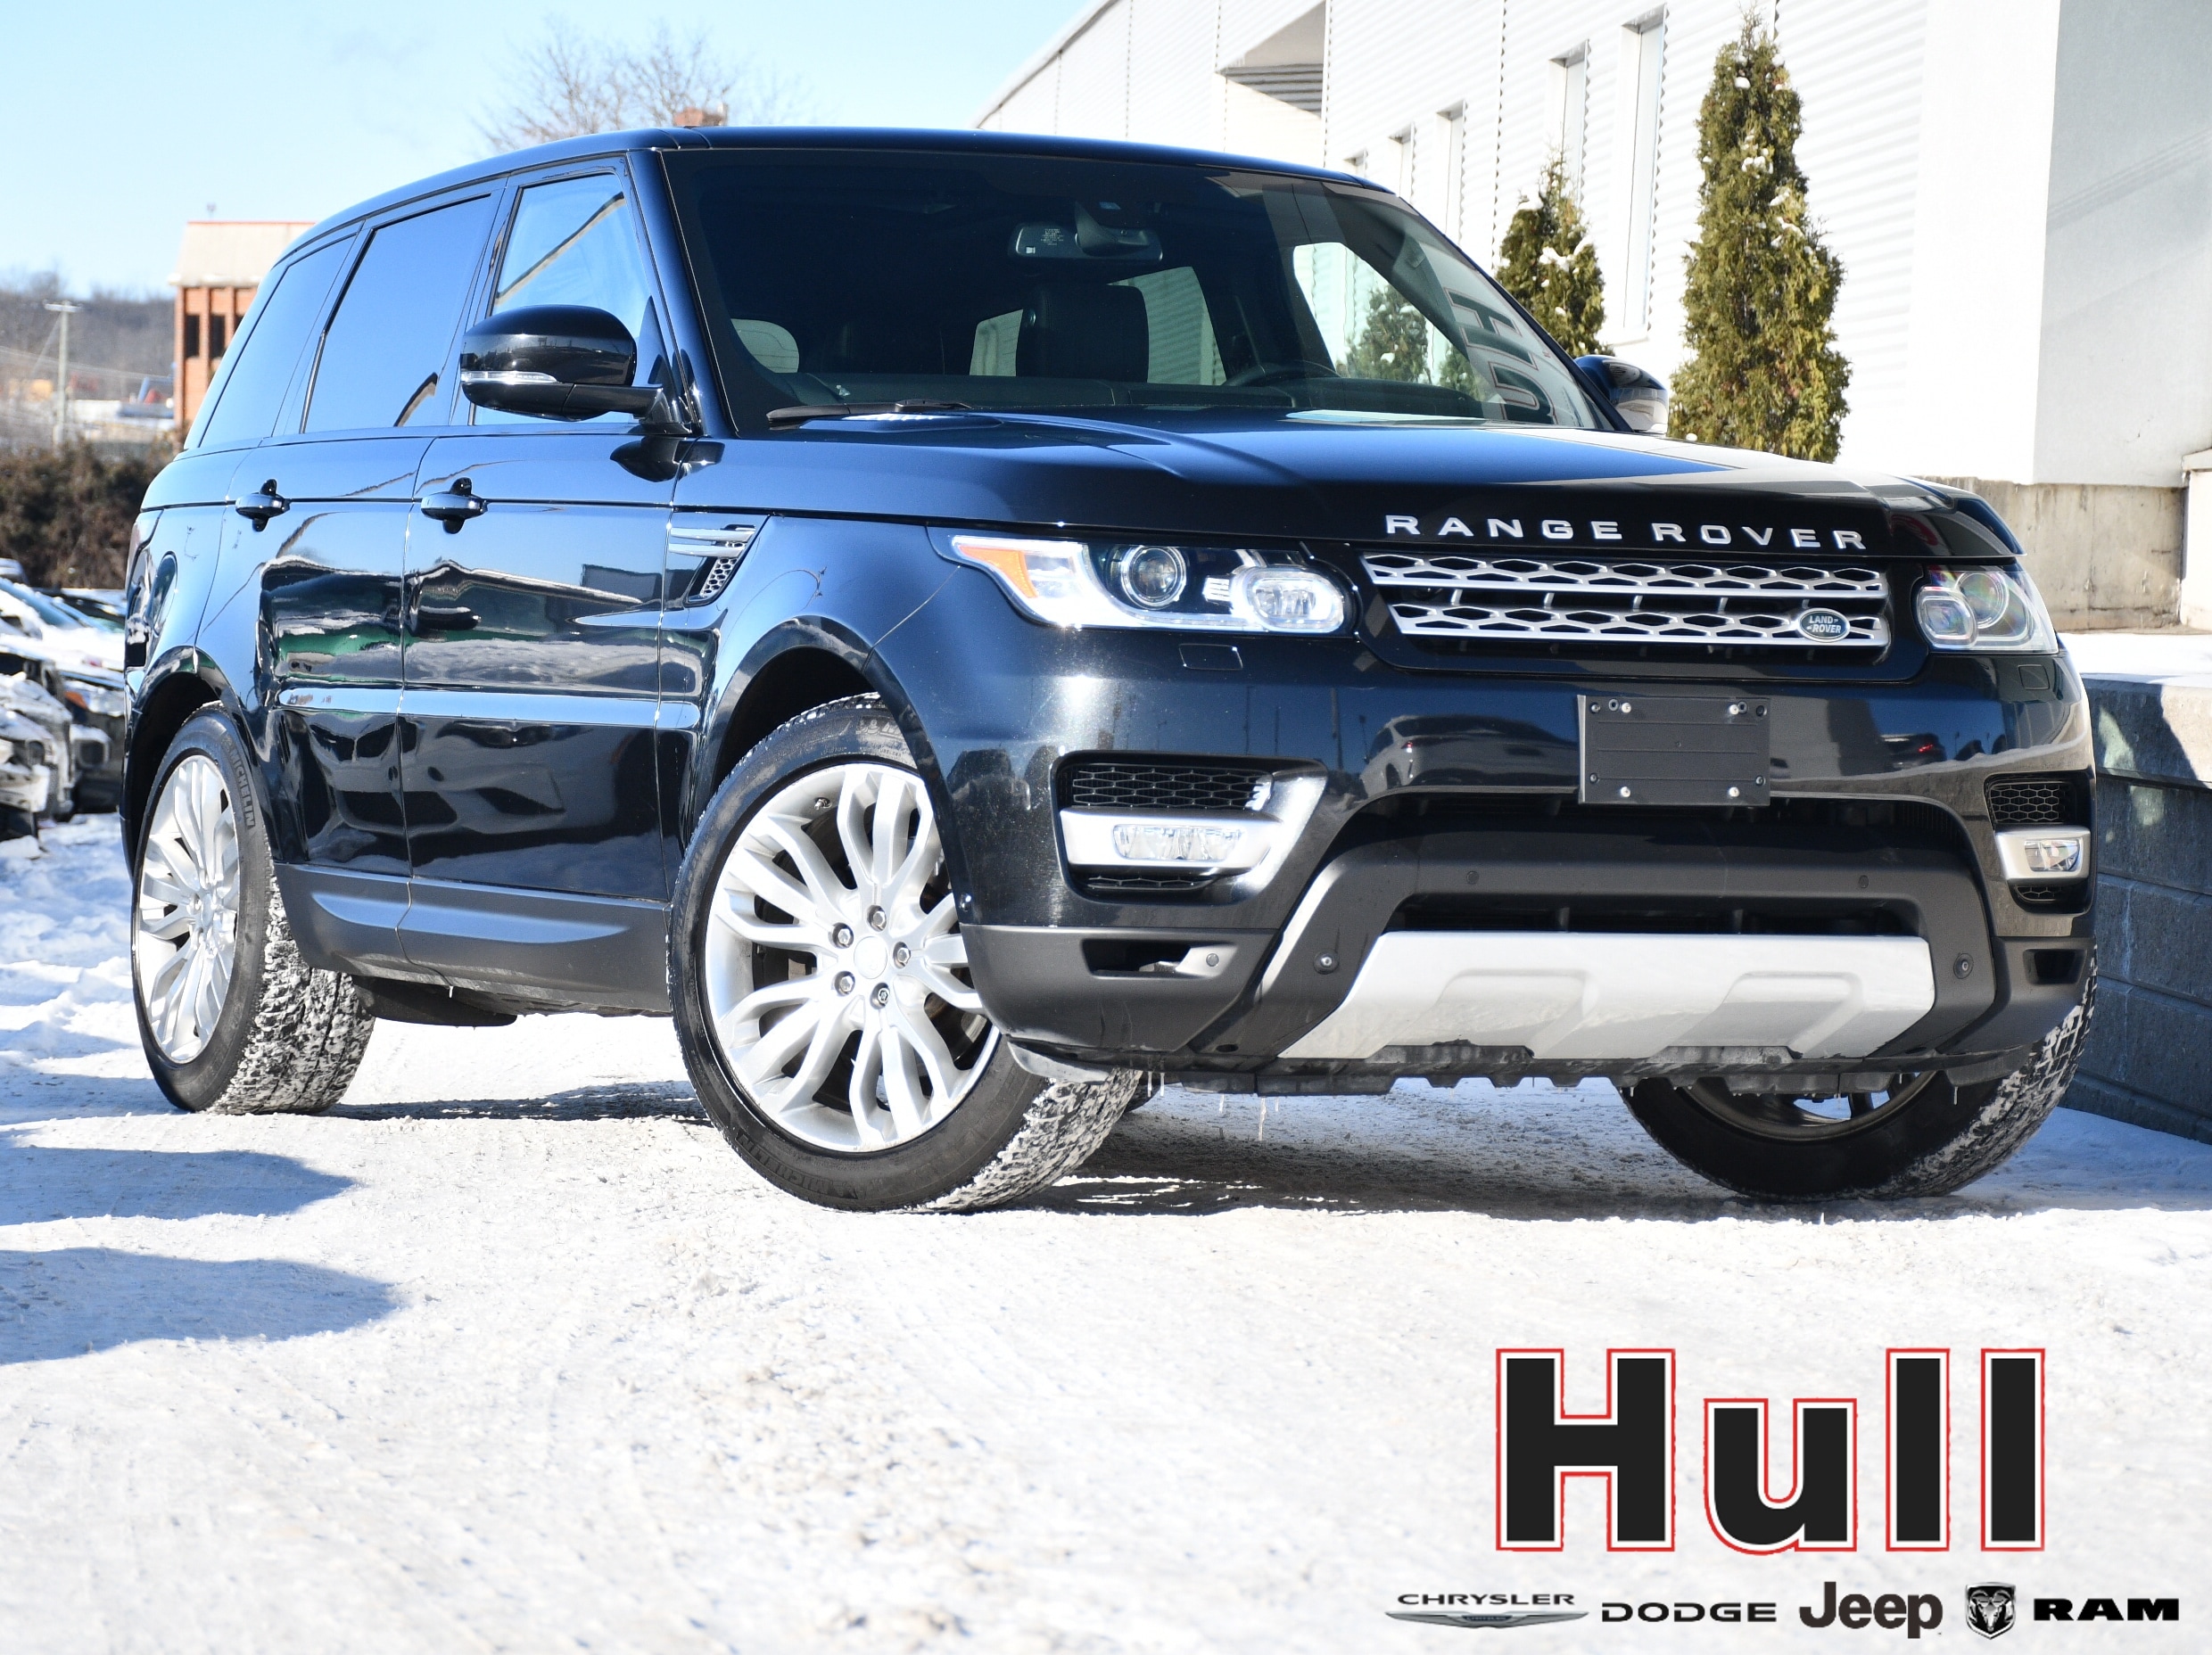 2015 Land Rover Range Rover Sport HSE - Merdian Sound System Pano Roof Heated F